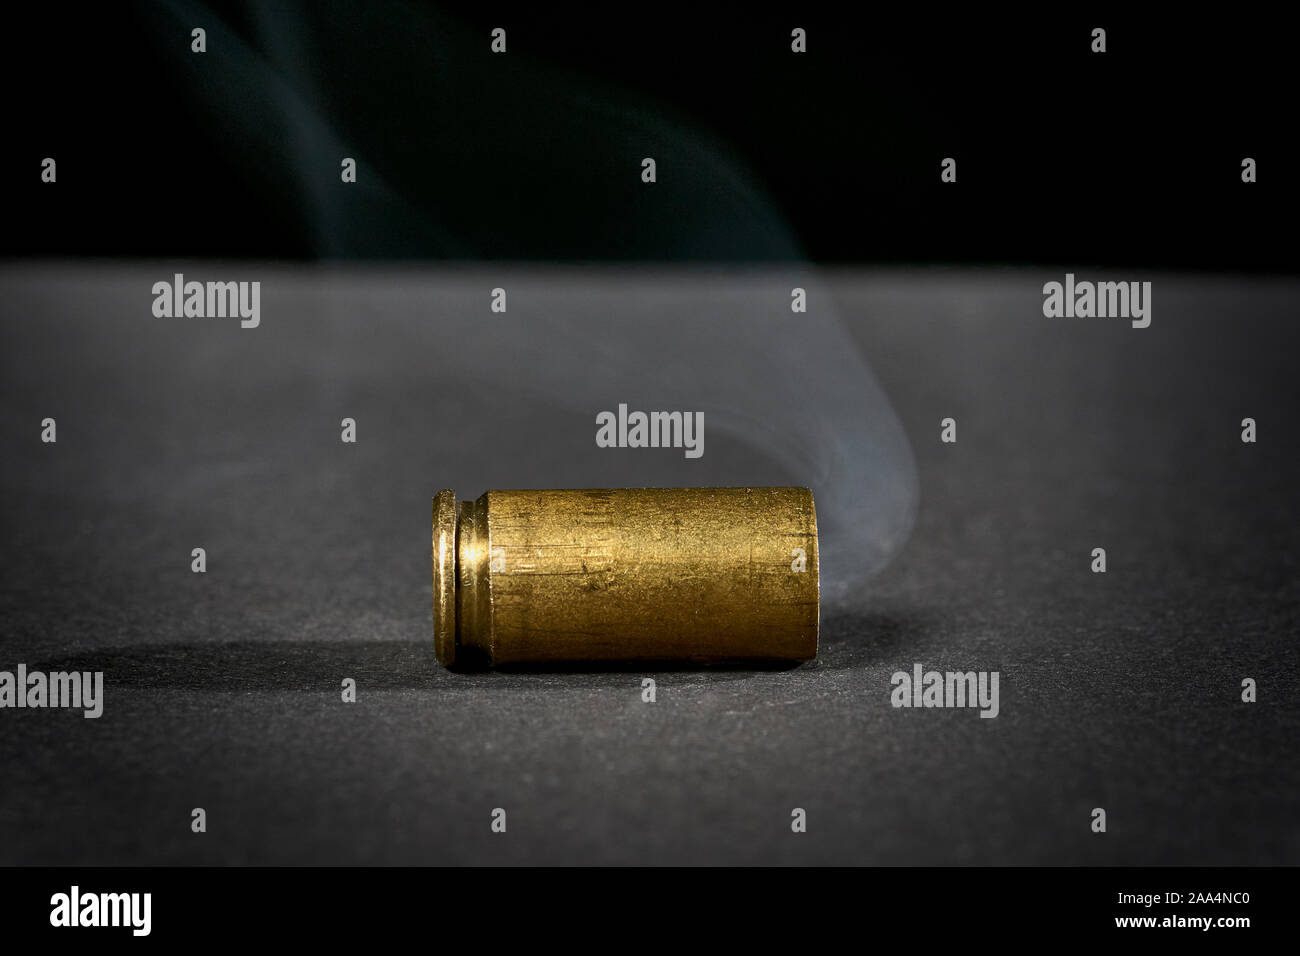 https://c8.alamy.com/comp/2AA4NC0/smoking-bullet-casing-fired-out-of-a-handgun-dropped-on-the-ground-2AA4NC0.jpg